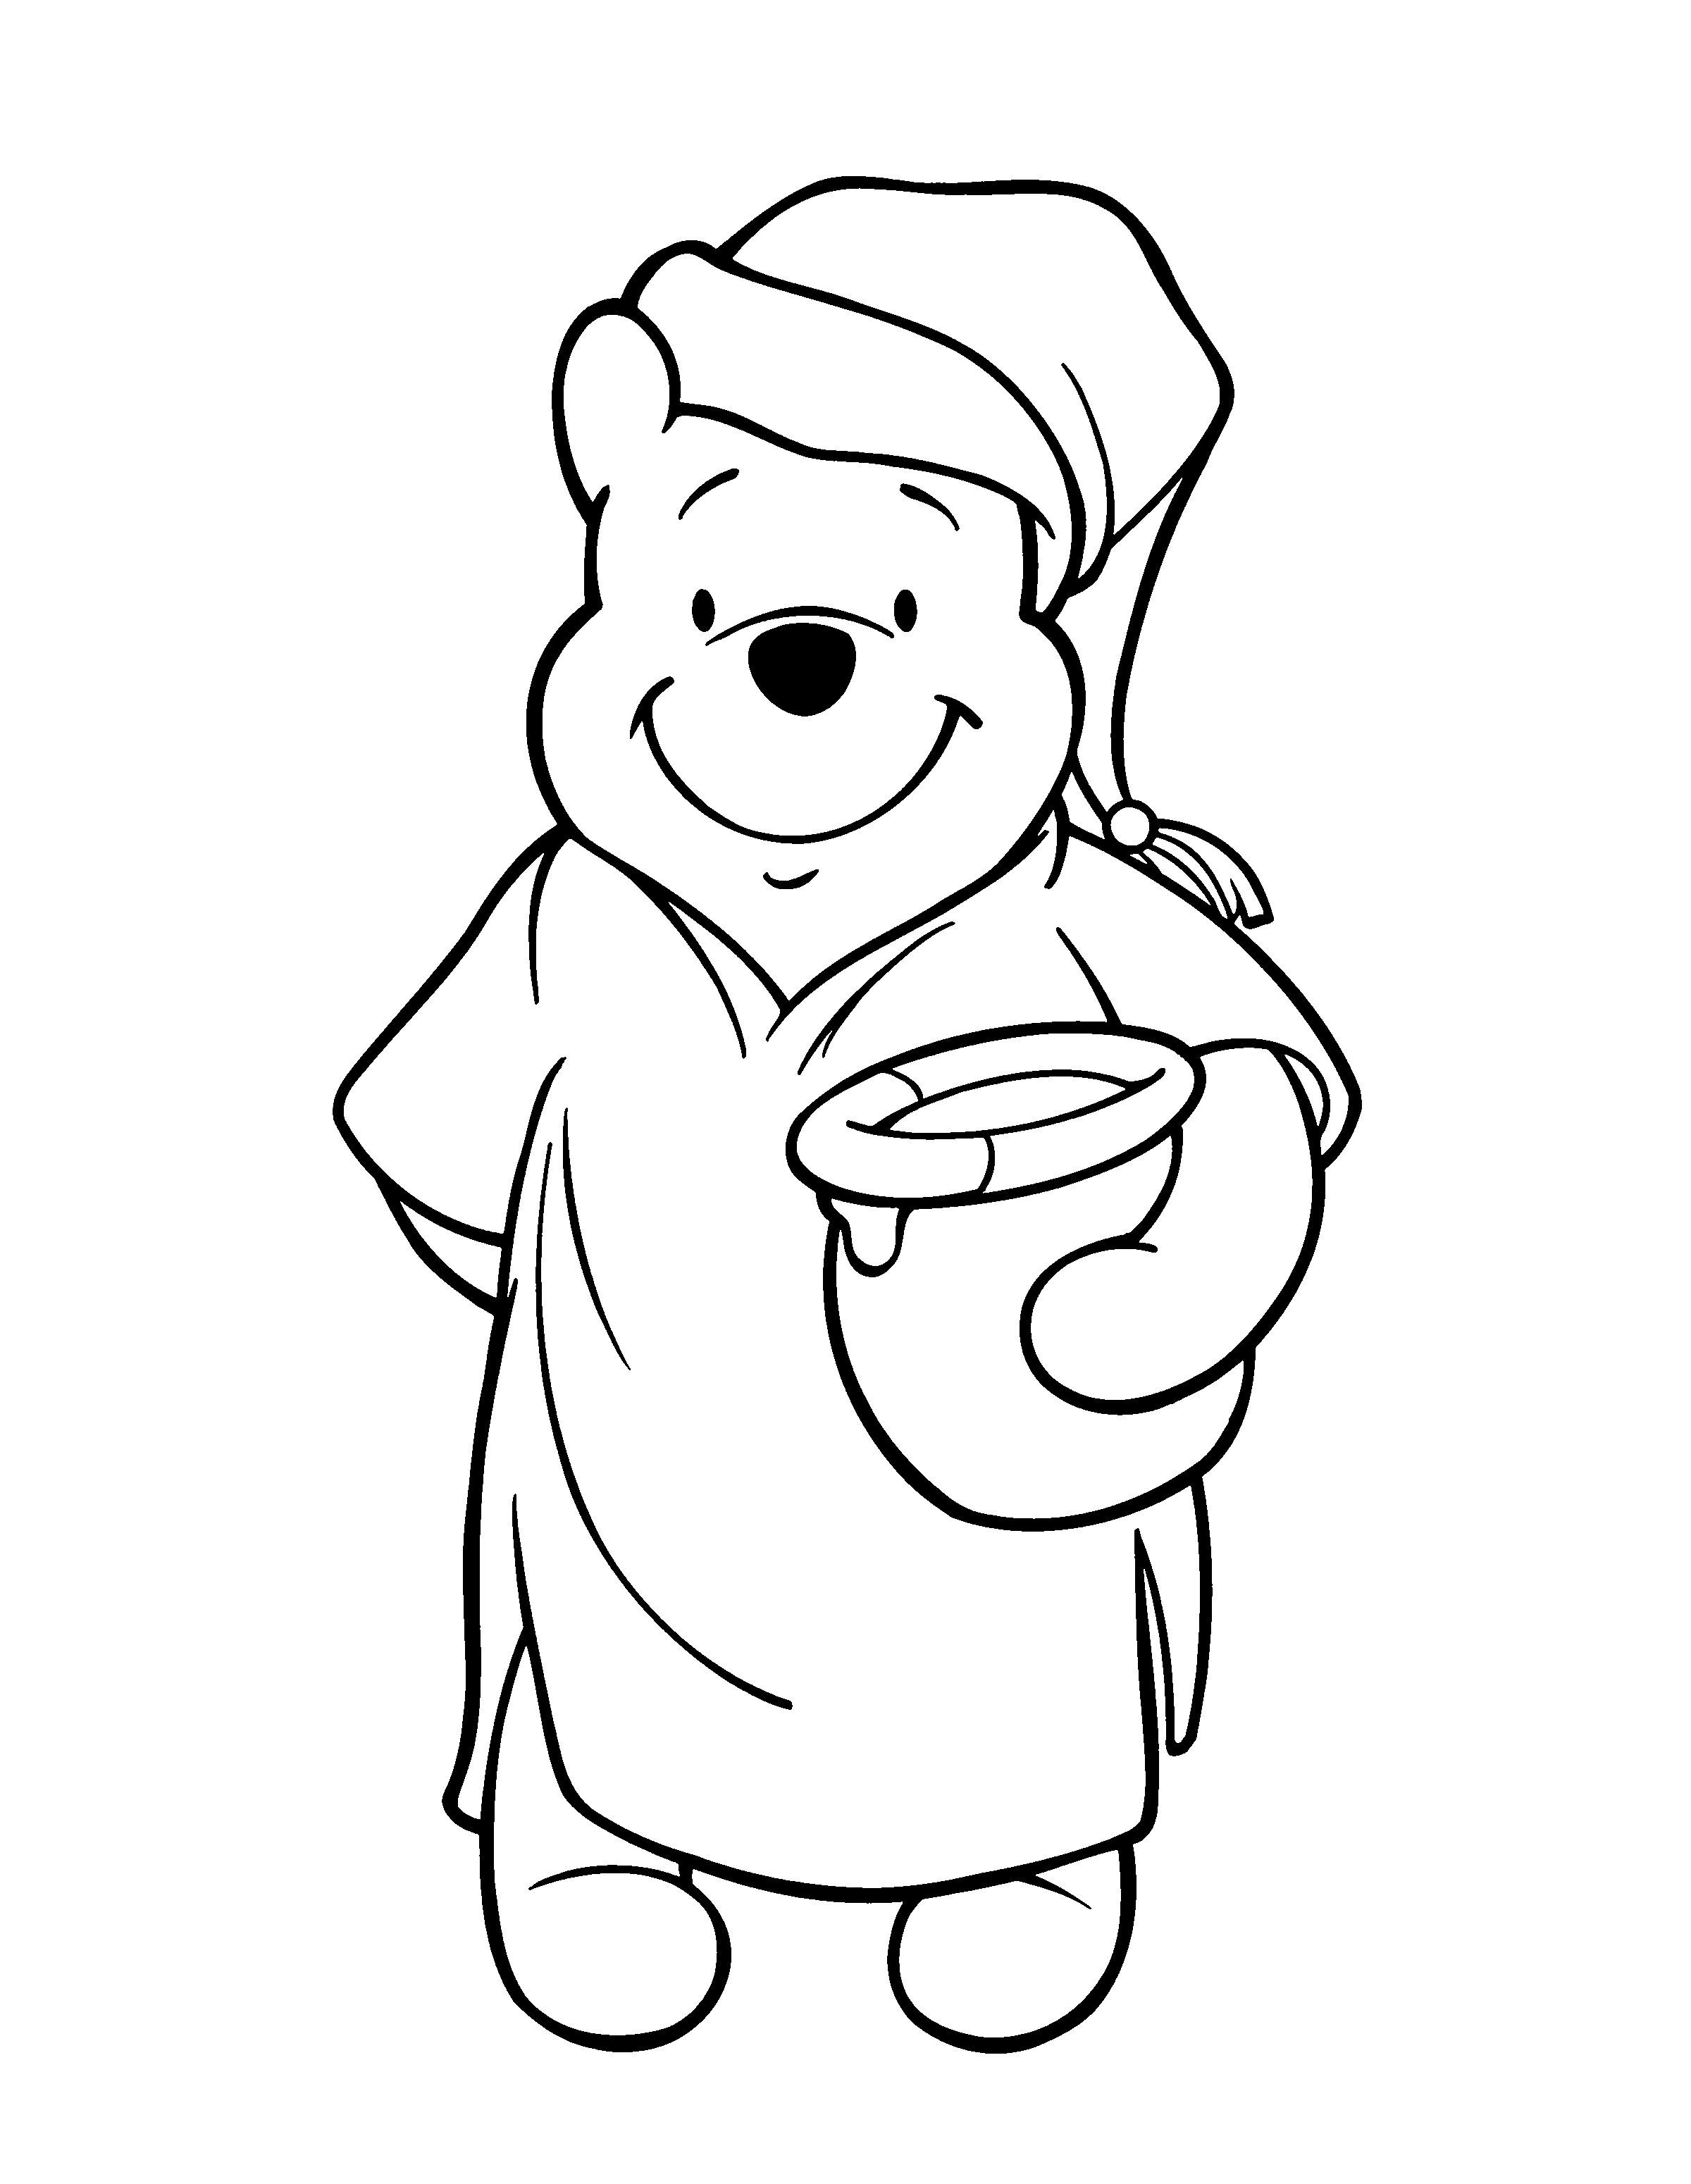 Coloring Page - Winnie the pooh coloring pages 65